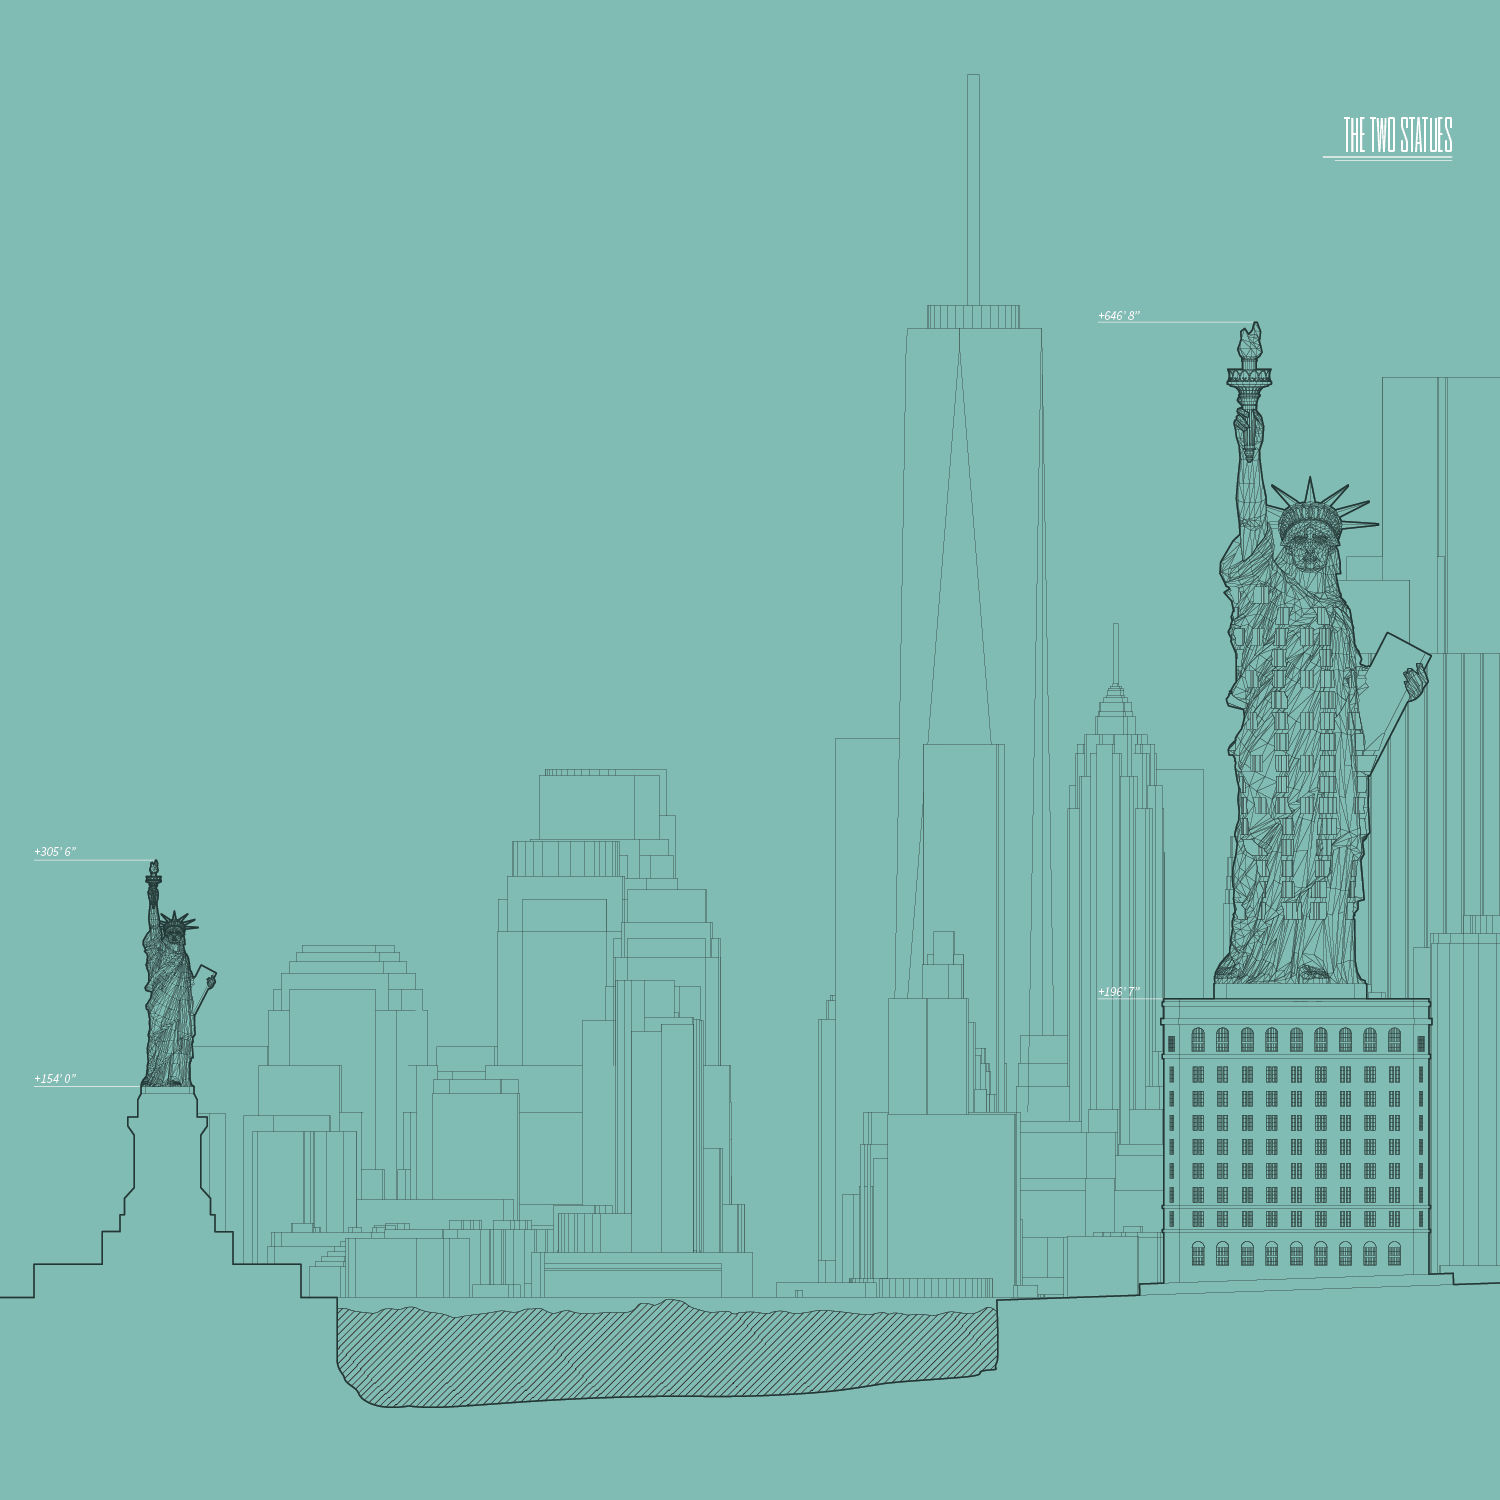 2D rendering of the Statue of Liberty